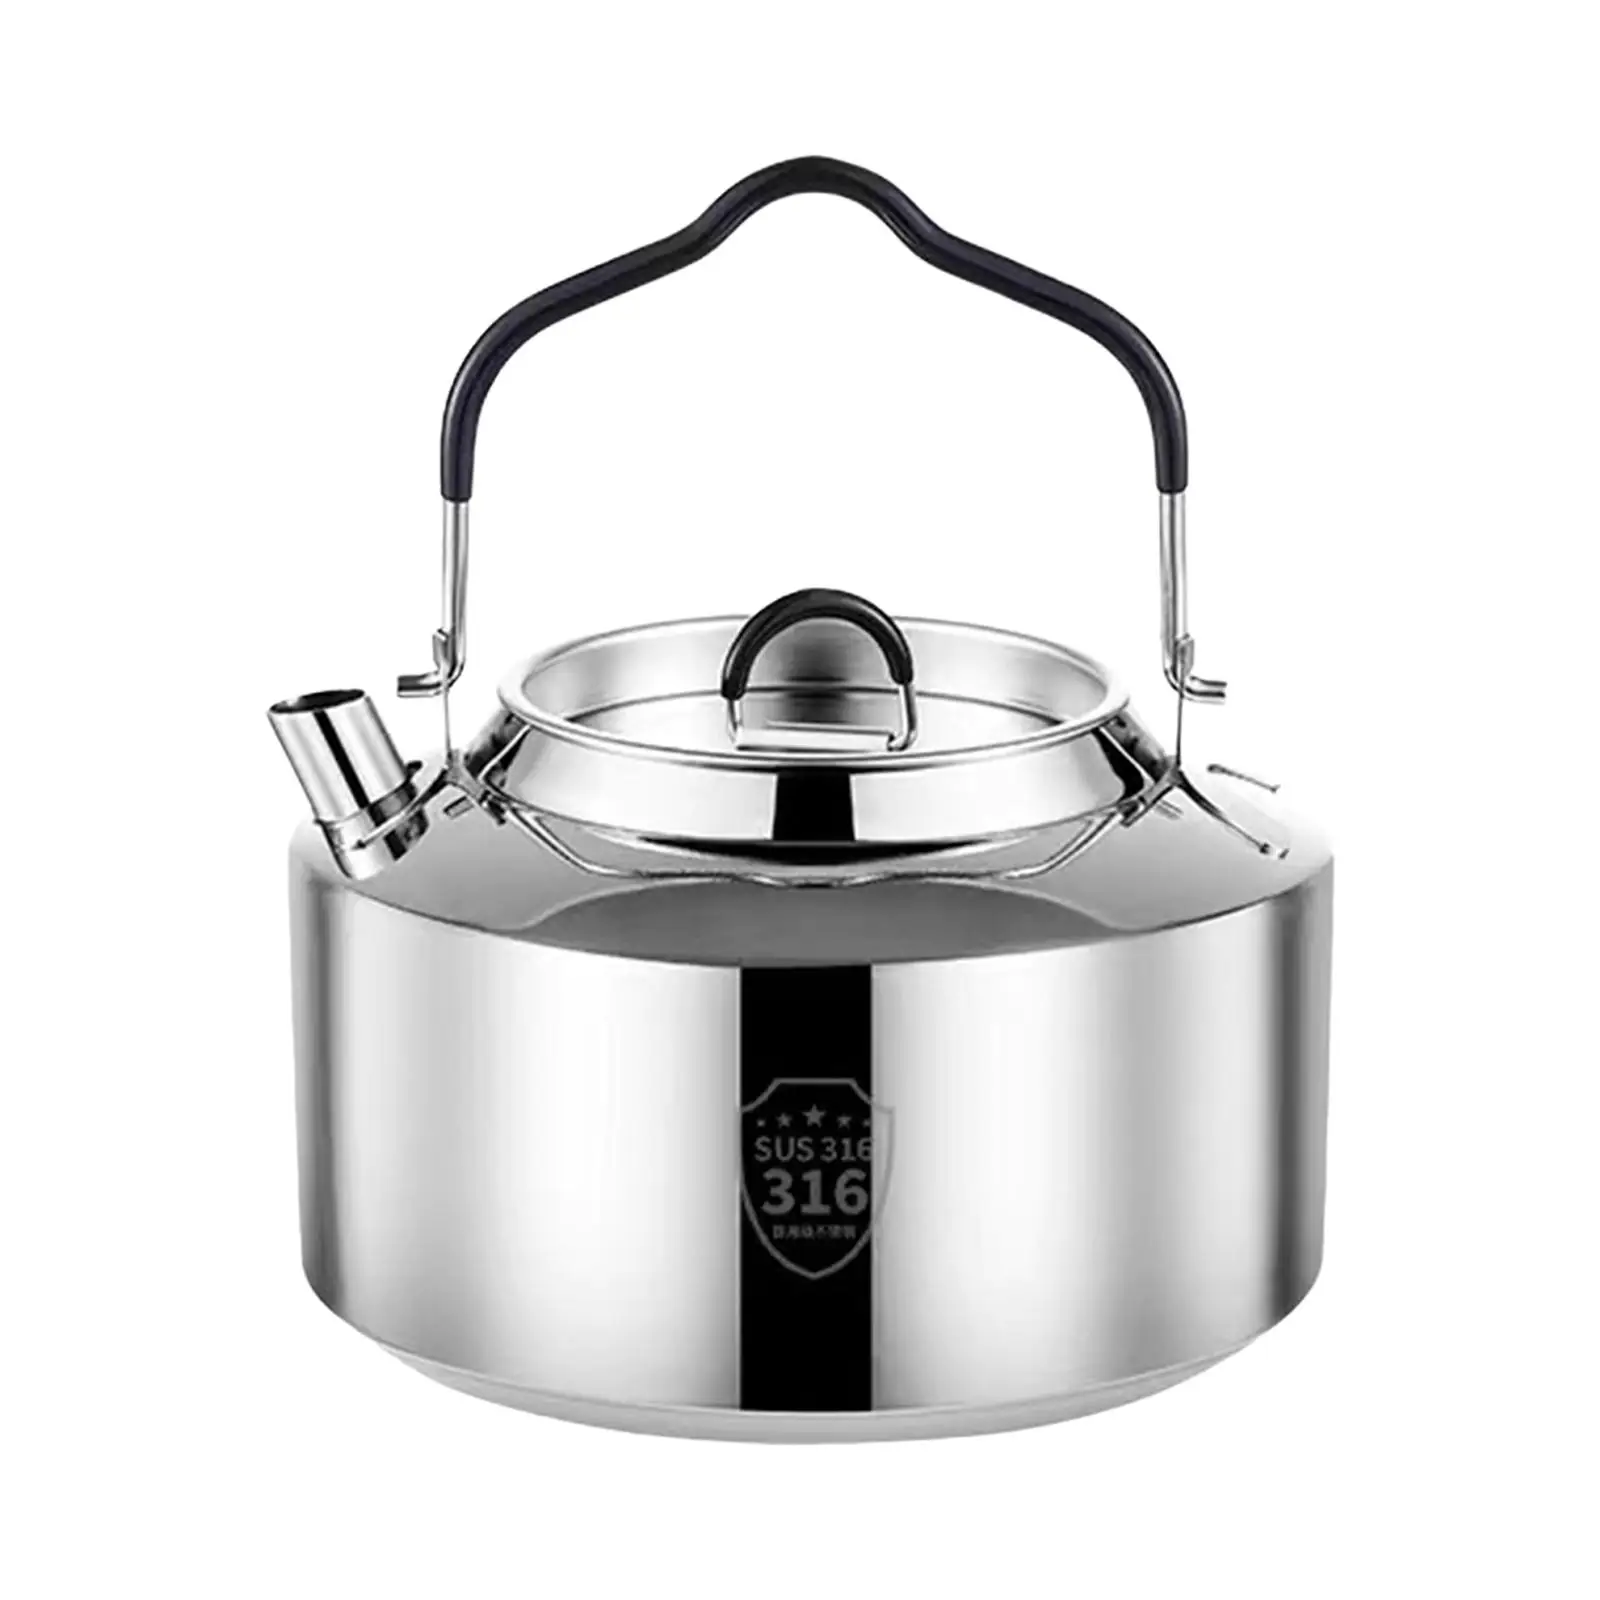 1.5L Camping Water Kettle Anti Scald Handle Lightweight Cook Pot Teapot Teakettle for Barbecue Backpacking Hiking Kitchen